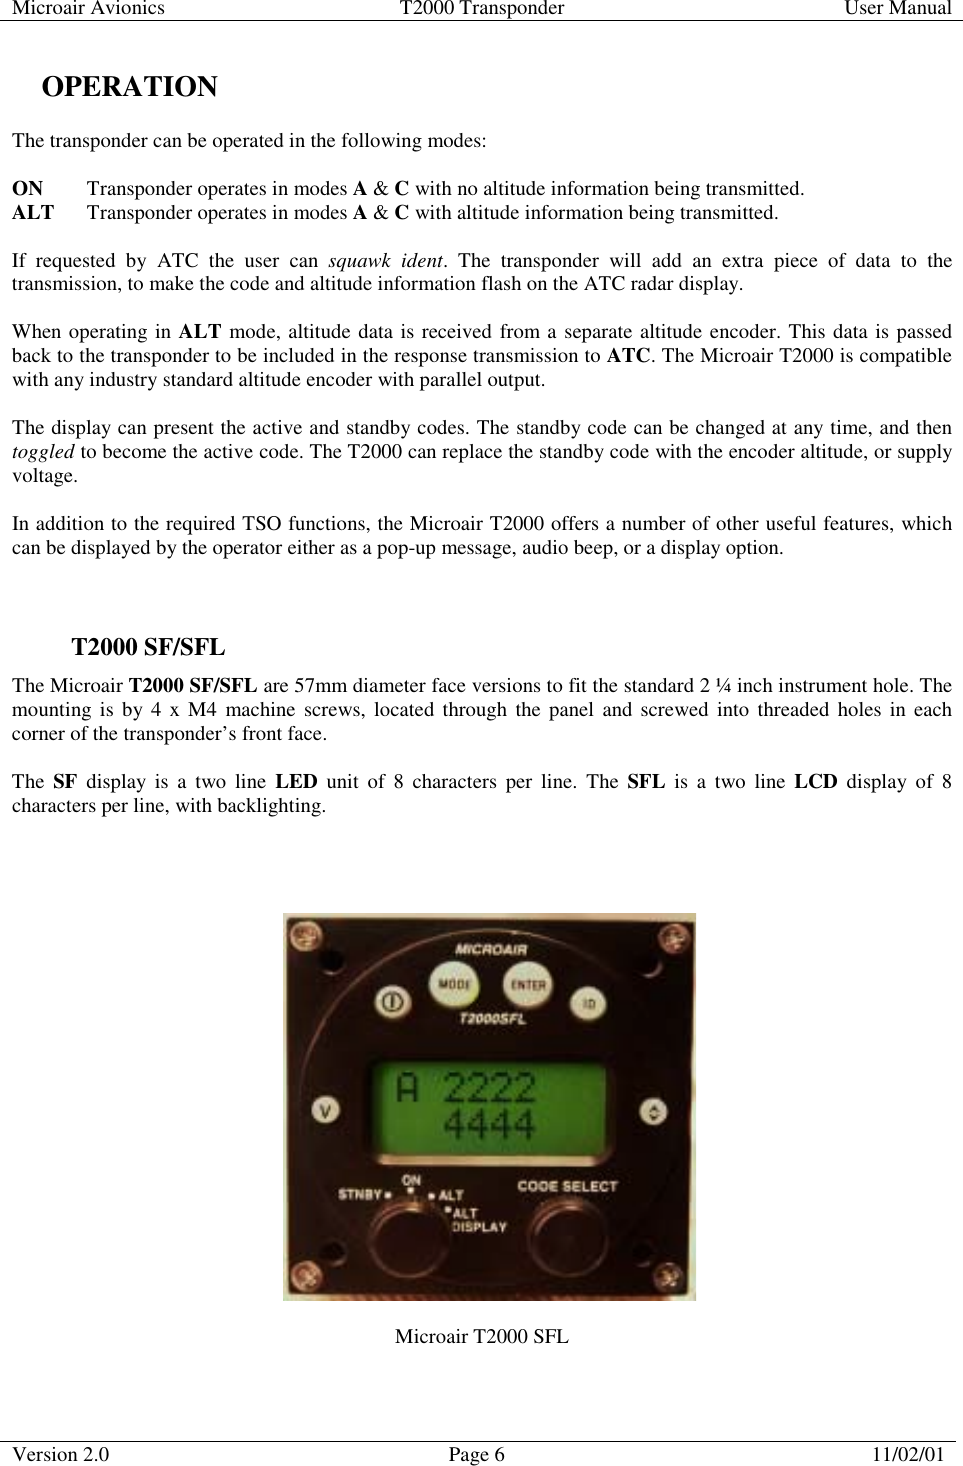 Microair Avionics  T2000 Transponder  User Manual  Version 2.0  Page 6  11/02/01     OPERATION The transponder can be operated in the following modes:  ON  Transponder operates in modes A &amp; C with no altitude information being transmitted. ALT  Transponder operates in modes A &amp; C with altitude information being transmitted.  If requested by ATC the user can squawk ident. The transponder will add an extra piece of data to the transmission, to make the code and altitude information flash on the ATC radar display.  When operating in ALT mode, altitude data is received from a separate altitude encoder. This data is passed back to the transponder to be included in the response transmission to ATC. The Microair T2000 is compatible with any industry standard altitude encoder with parallel output.  The display can present the active and standby codes. The standby code can be changed at any time, and then toggled to become the active code. The T2000 can replace the standby code with the encoder altitude, or supply voltage.  In addition to the required TSO functions, the Microair T2000 offers a number of other useful features, which can be displayed by the operator either as a pop-up message, audio beep, or a display option.   T2000 SF/SFL The Microair T2000 SF/SFL are 57mm diameter face versions to fit the standard 2 ¼ inch instrument hole. The mounting is by 4 x M4 machine screws, located through the panel and screwed into threaded holes in each corner of the transponder’s front face.   The  SF display is a two line LED unit of 8 characters per line. The SFL is a two line LCD display of 8 characters per line, with backlighting.                                                            Microair T2000 SFL 